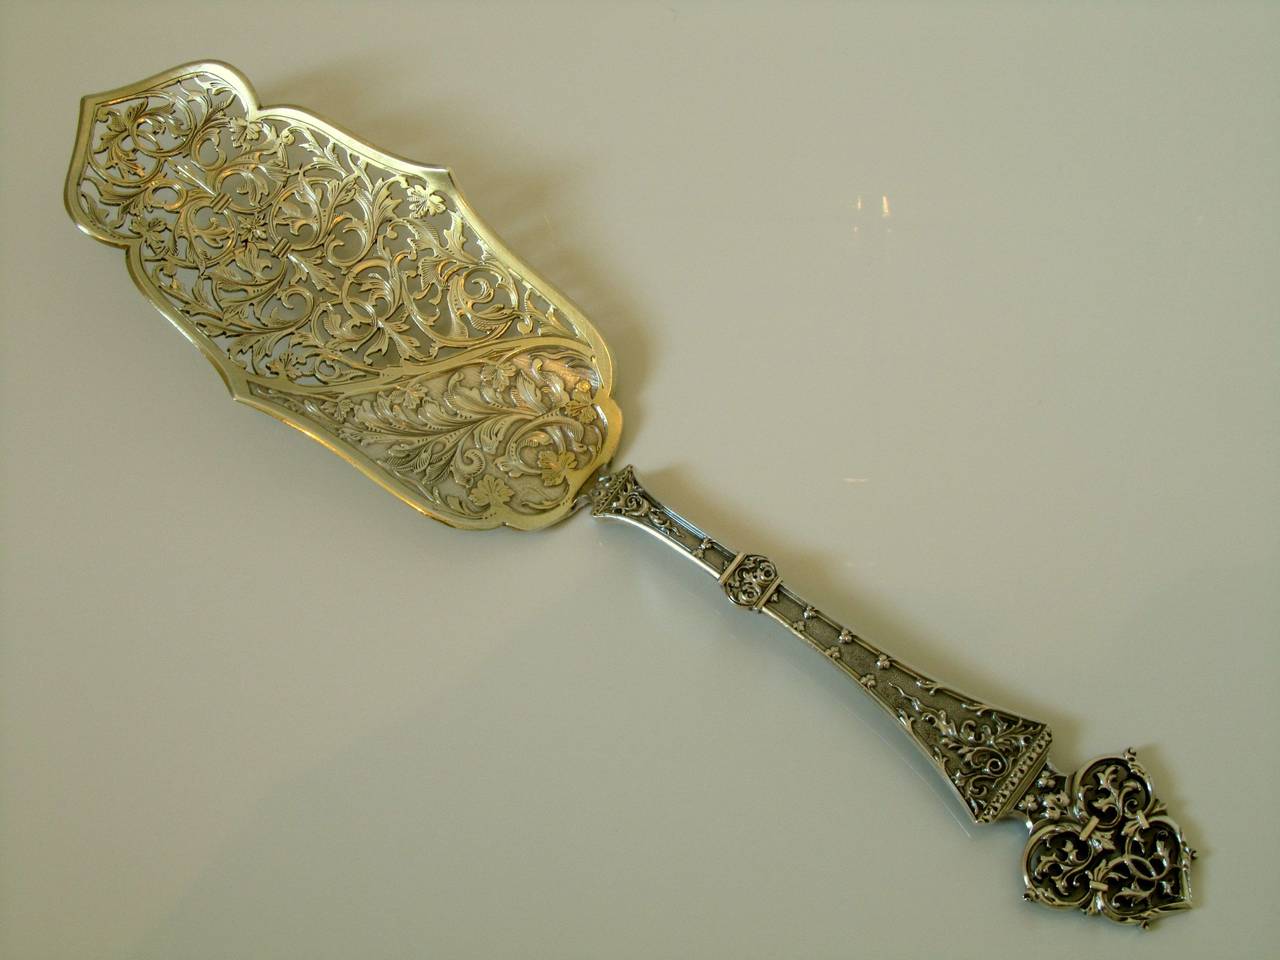 Puiforcat Masterpiece French All Sterling Silver Pie/Pastry Server Trilobé 2